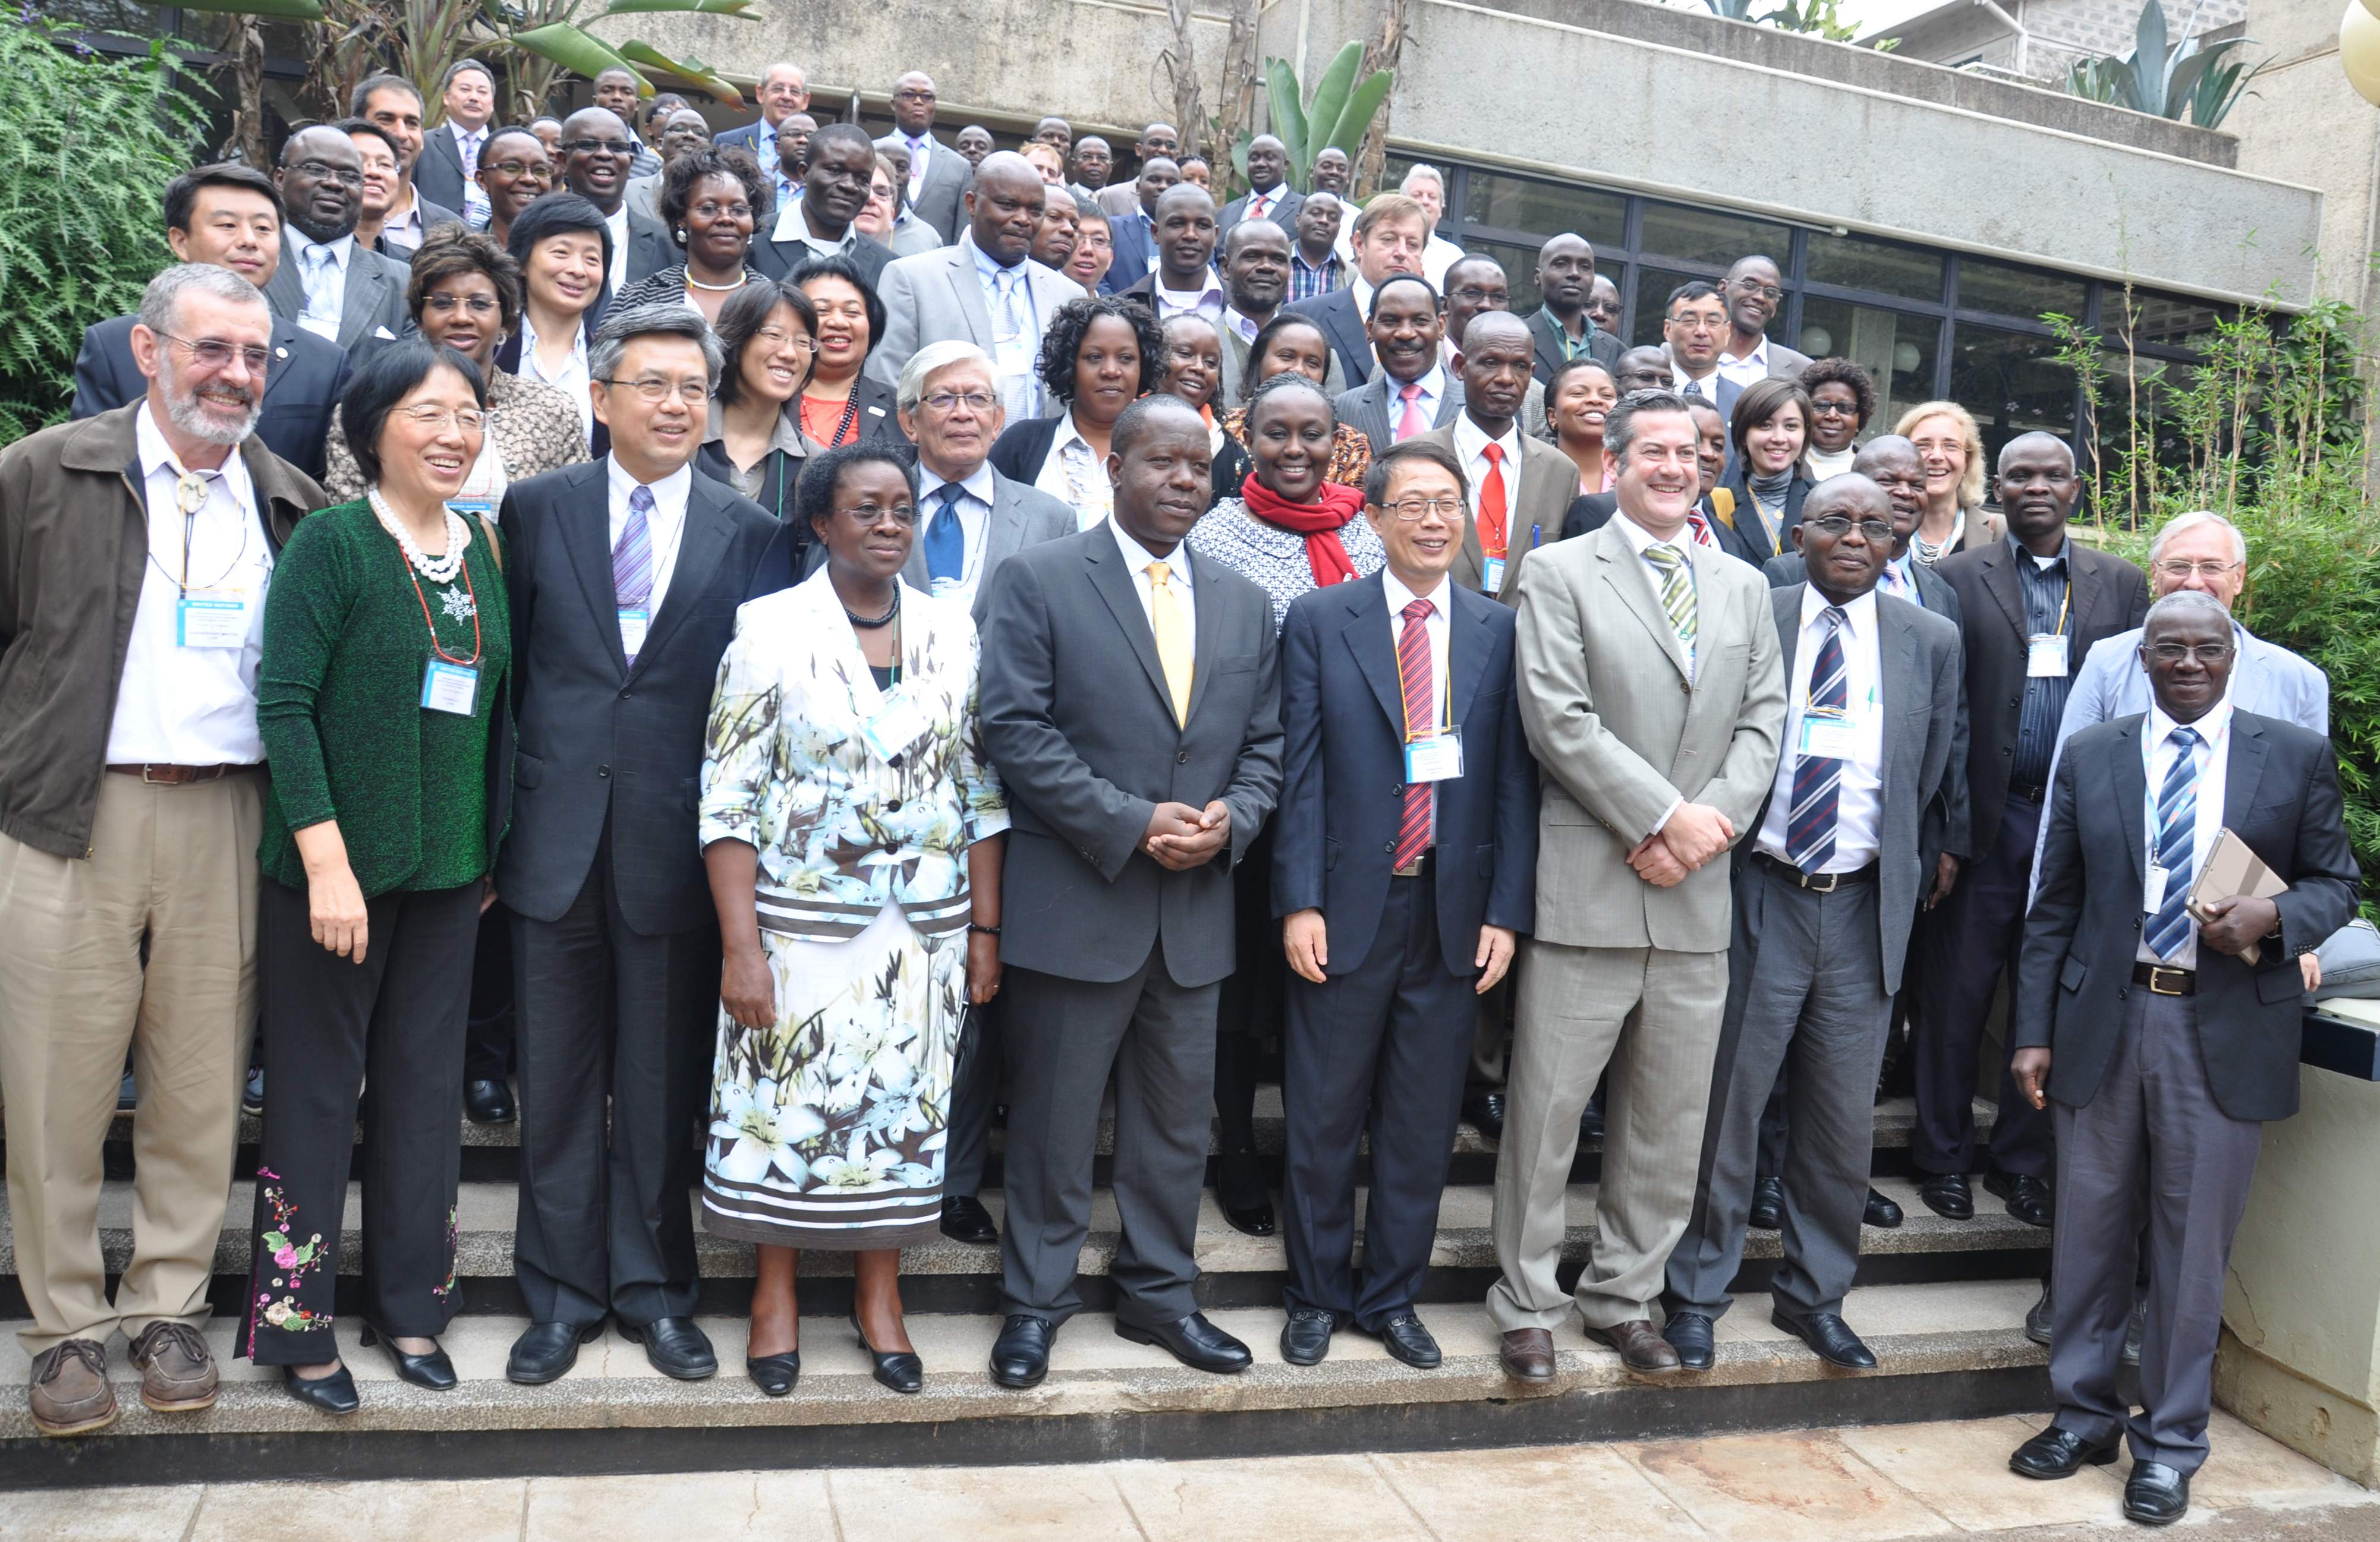 Participants of the Workshop on Open Data for Science and Sustainability in Developing Countries, UNESCO, Nairobi, Kenya, 6-8 August 2014